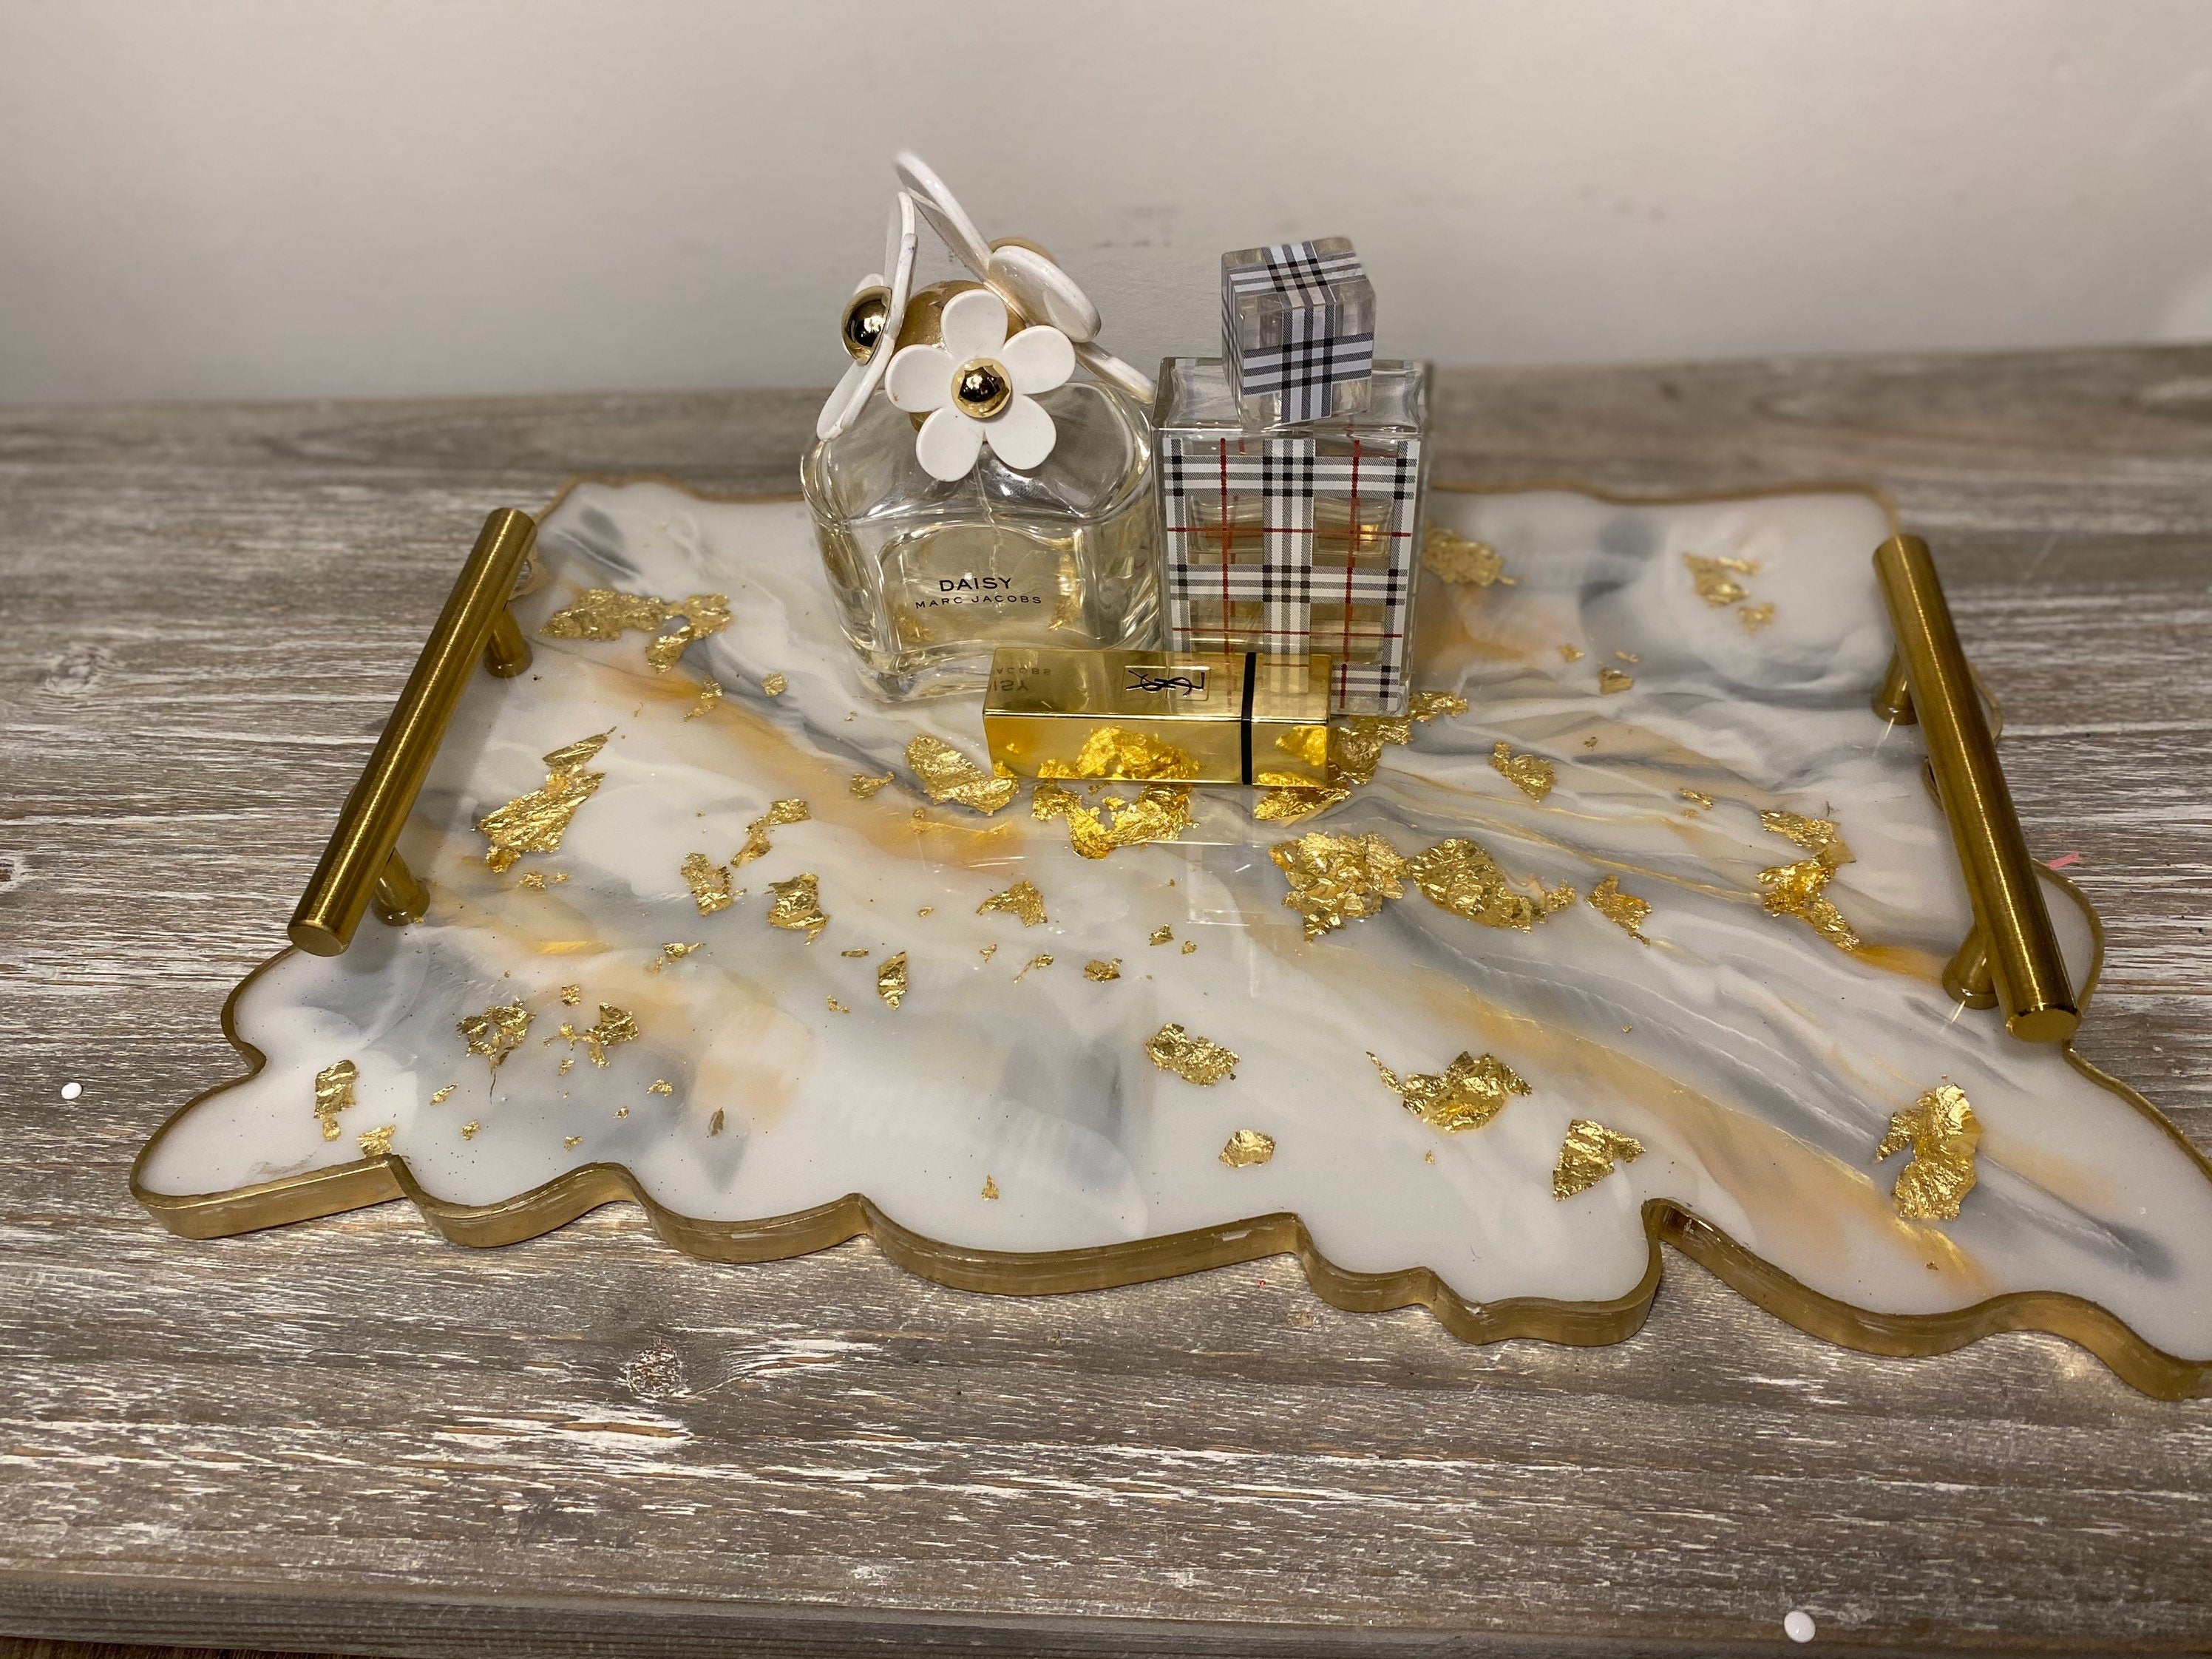 GOLD LEAF & SILVER Marble | Luxury Vanity Tray | Perfume Holder| Serving Tray | Desk Art | Resin Tray | Jewelry Holder | Gold Marble Tray